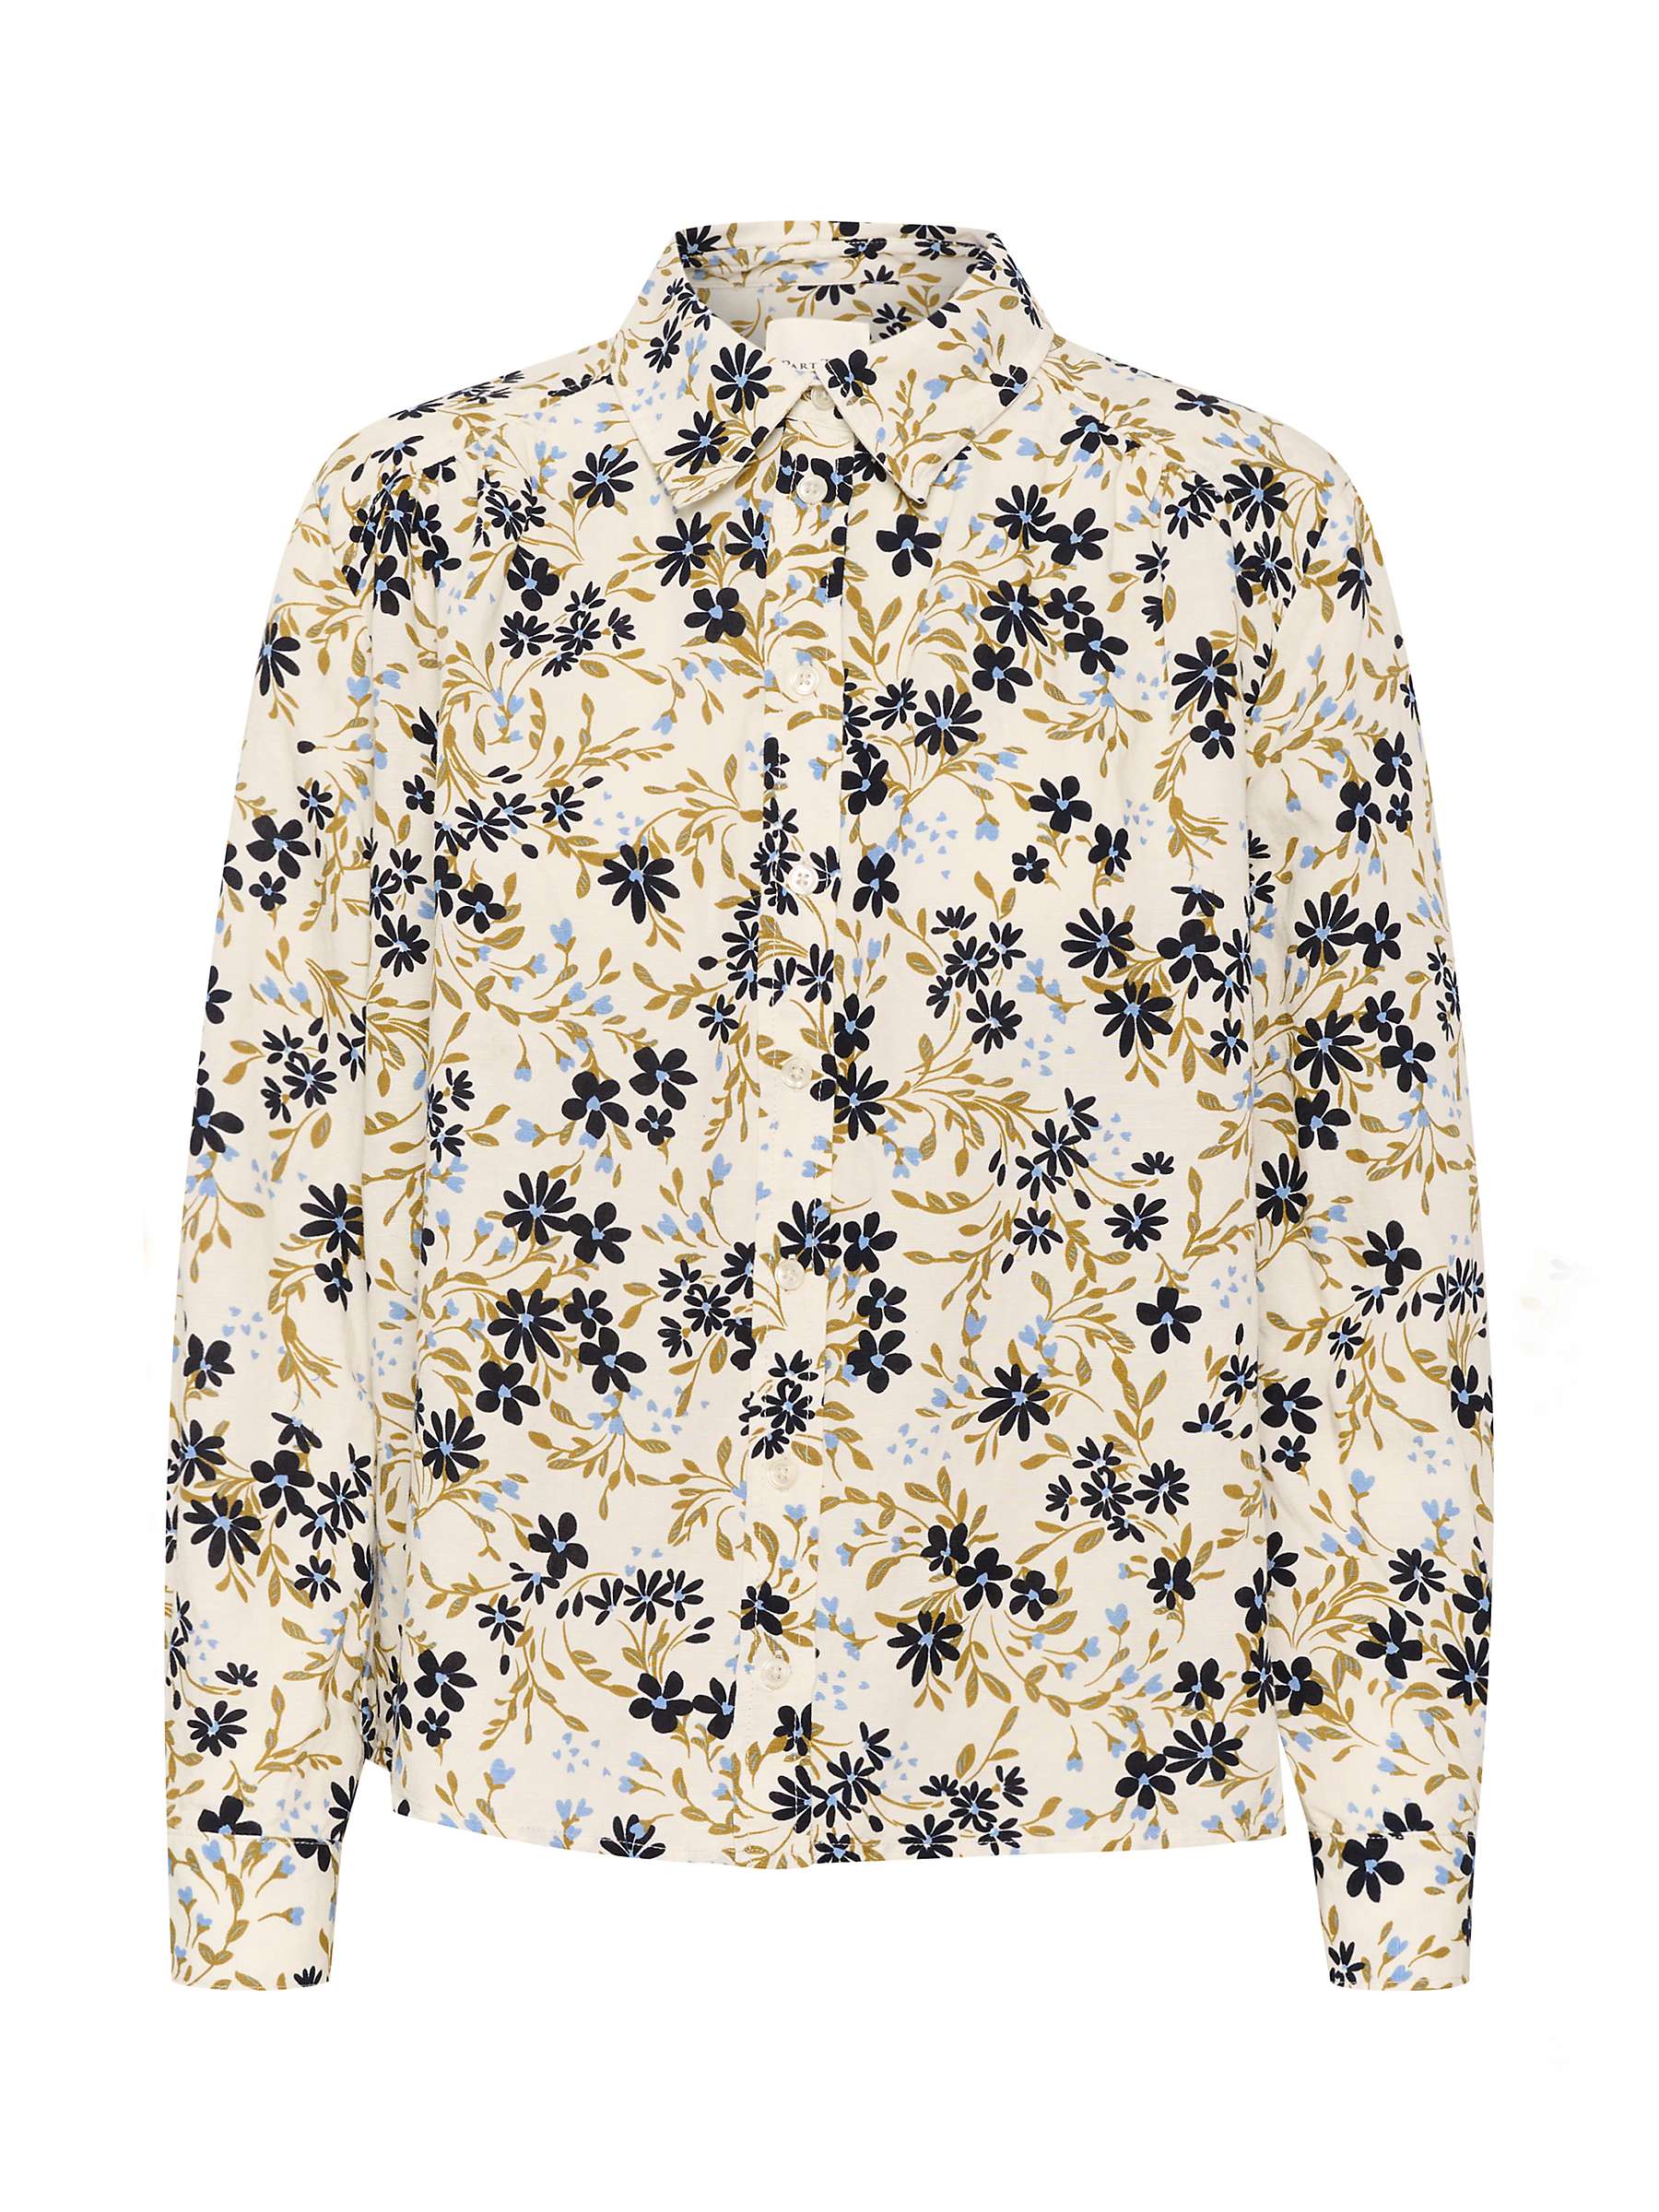 Buy Part Two Elvera Ecovero Floral Long Sleeve Shirt Online at johnlewis.com